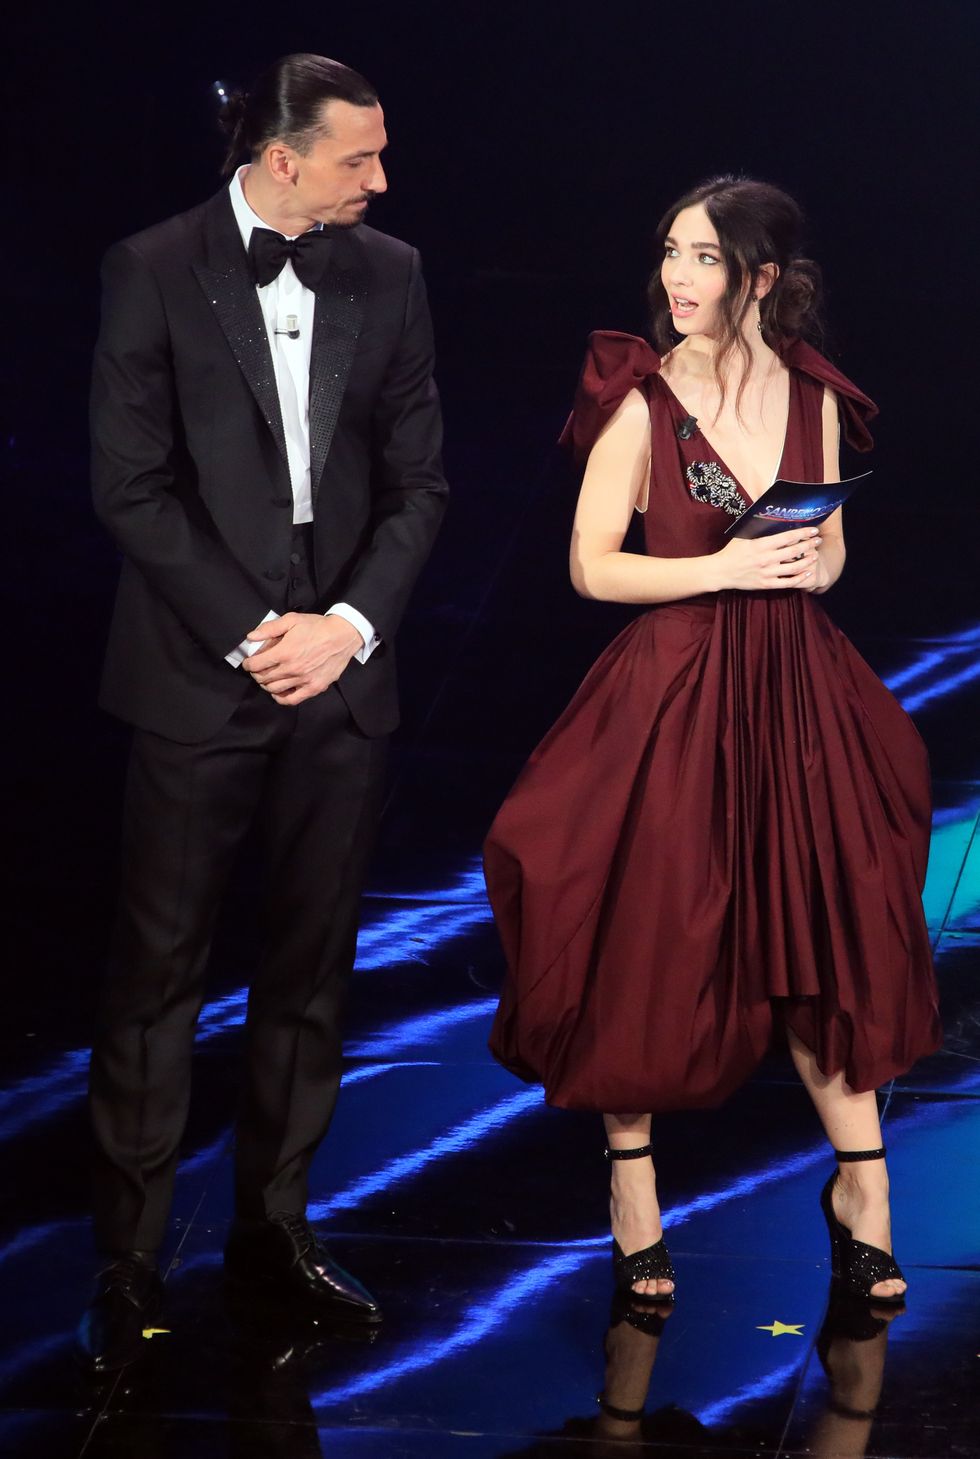 ac milans swedish forward zlatan ibrahimovic performs an act with italian actress matilda de angelis during the opening night of the san remo 2021 music festival in san remo on march 02, 2021 photo by marco ravagli  afp photo by marco ravagliafp via getty images